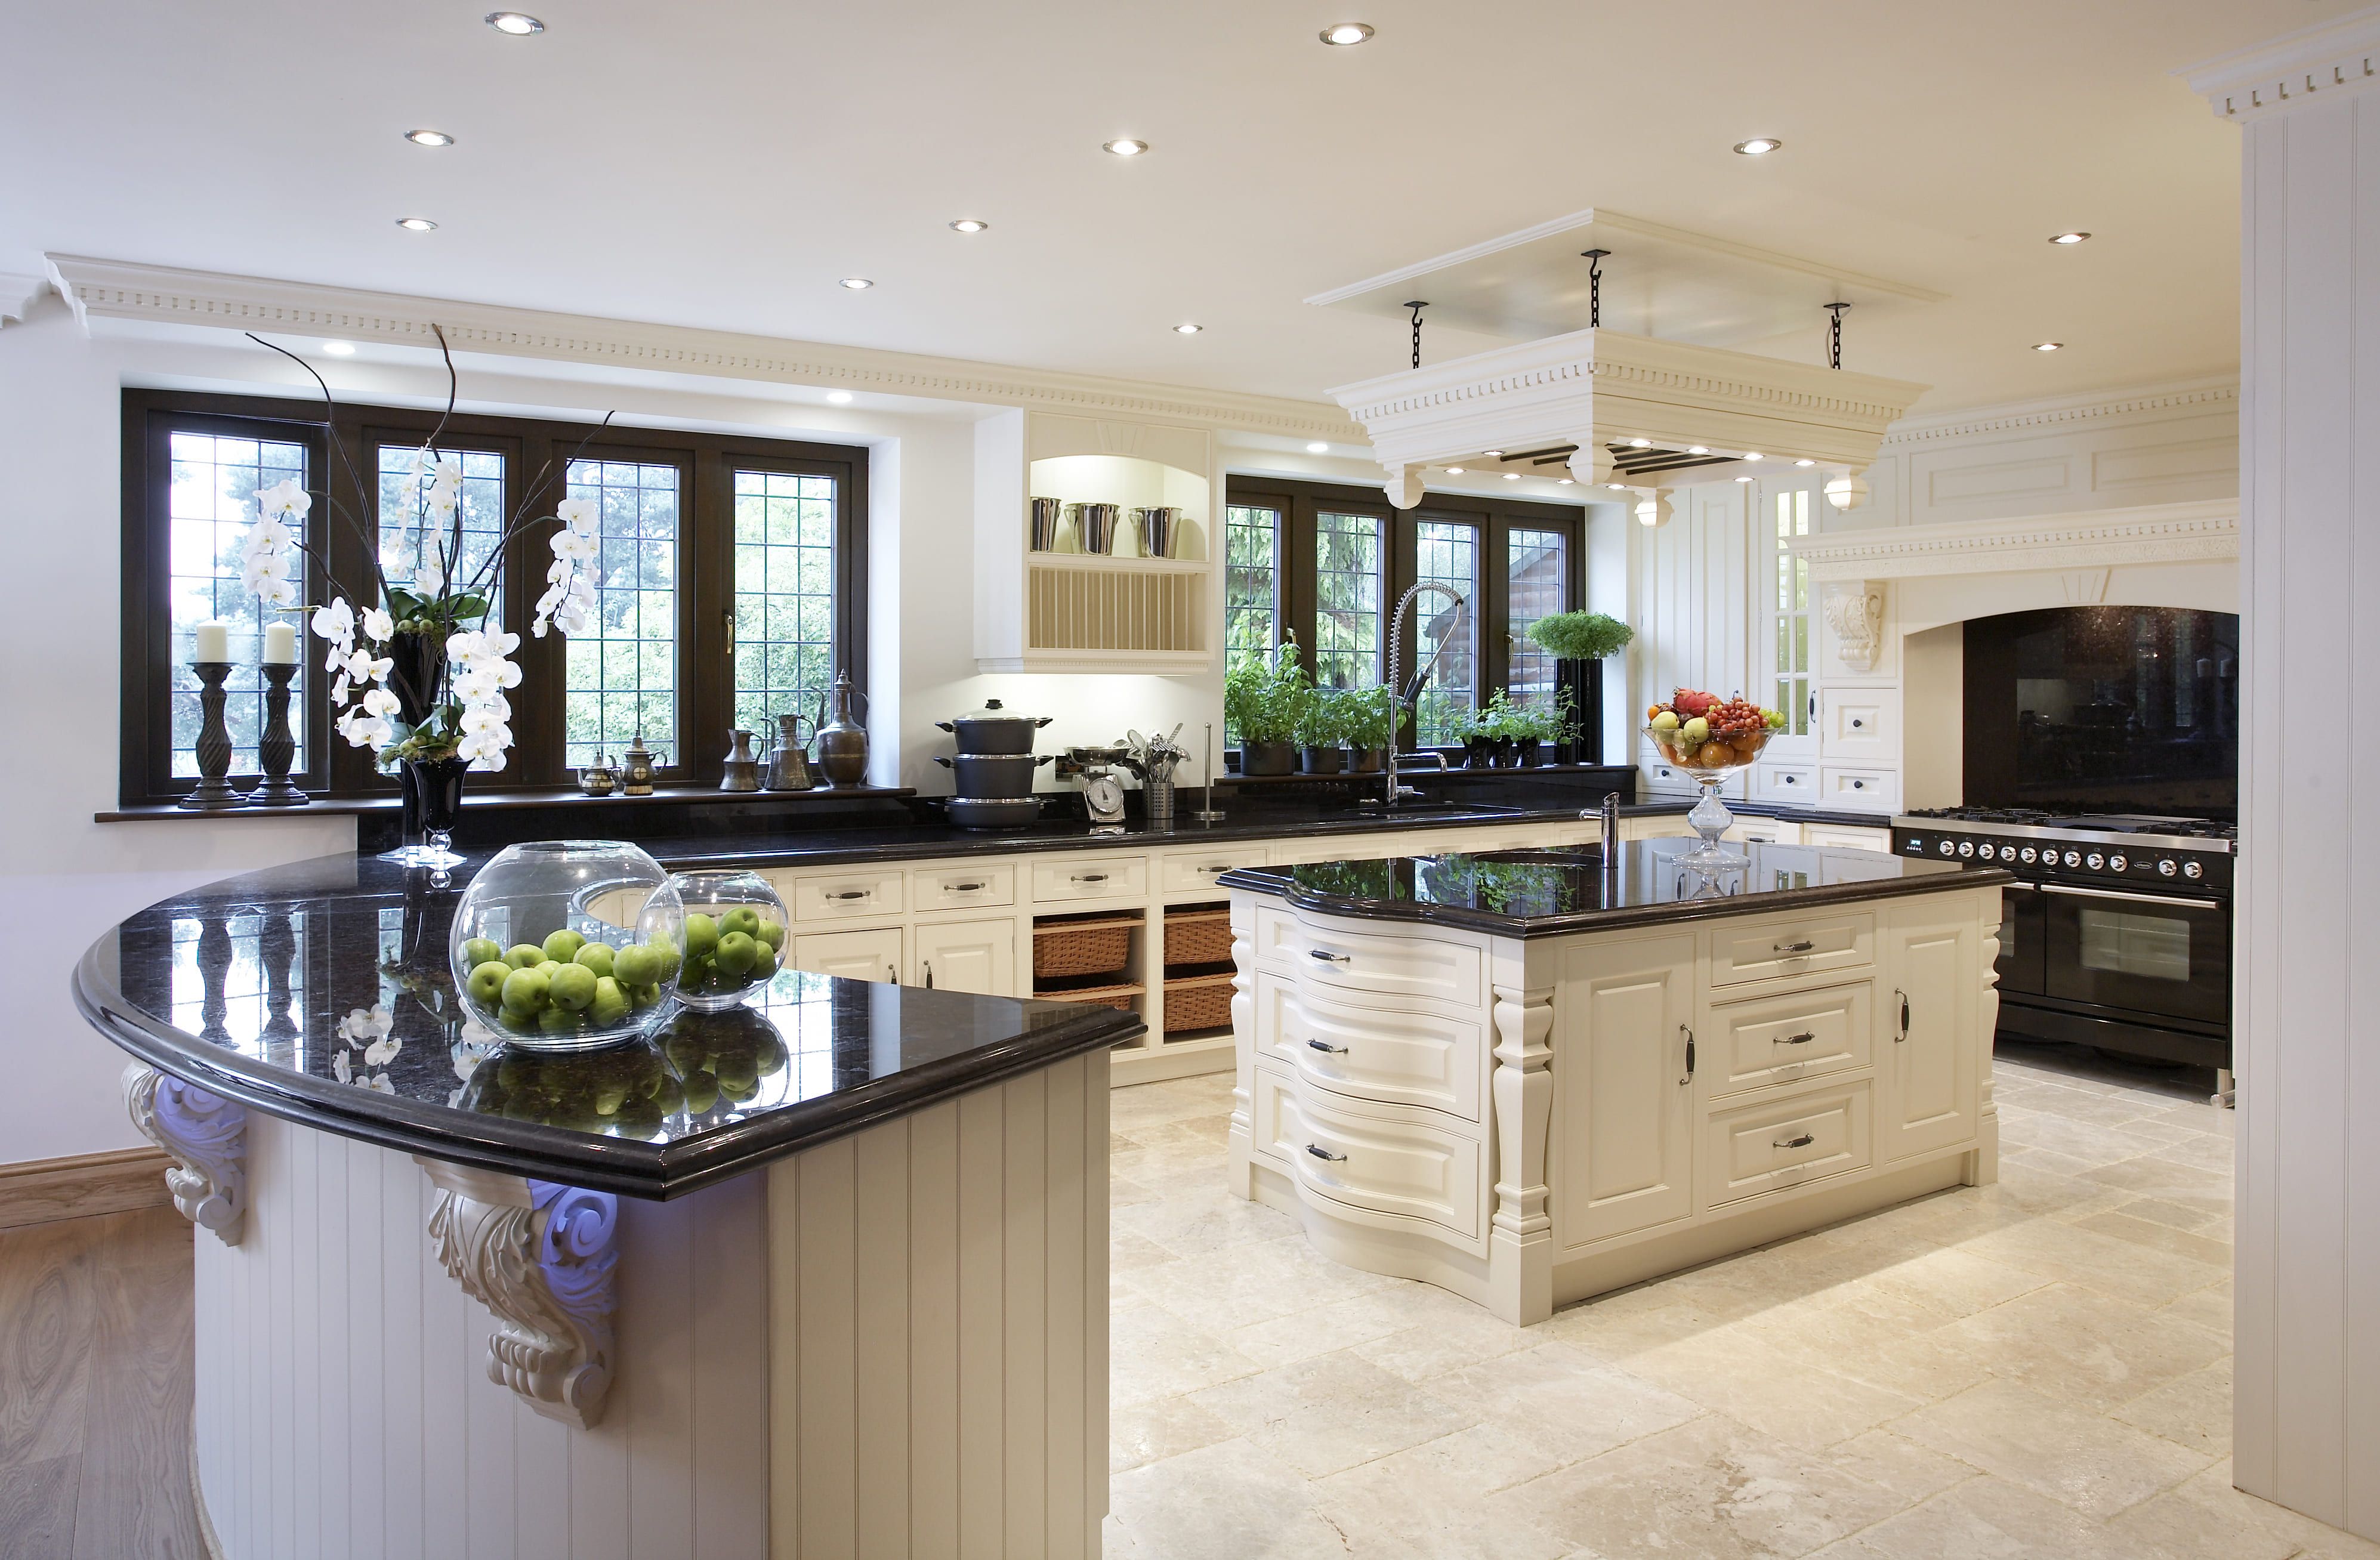 A spacious bespoke kitchen with cream panelled cabinetry, black granite worktops, a central island, and a traditional range cooker, all set against a backdrop of natural stone flooring and an ornate plastered ceiling.